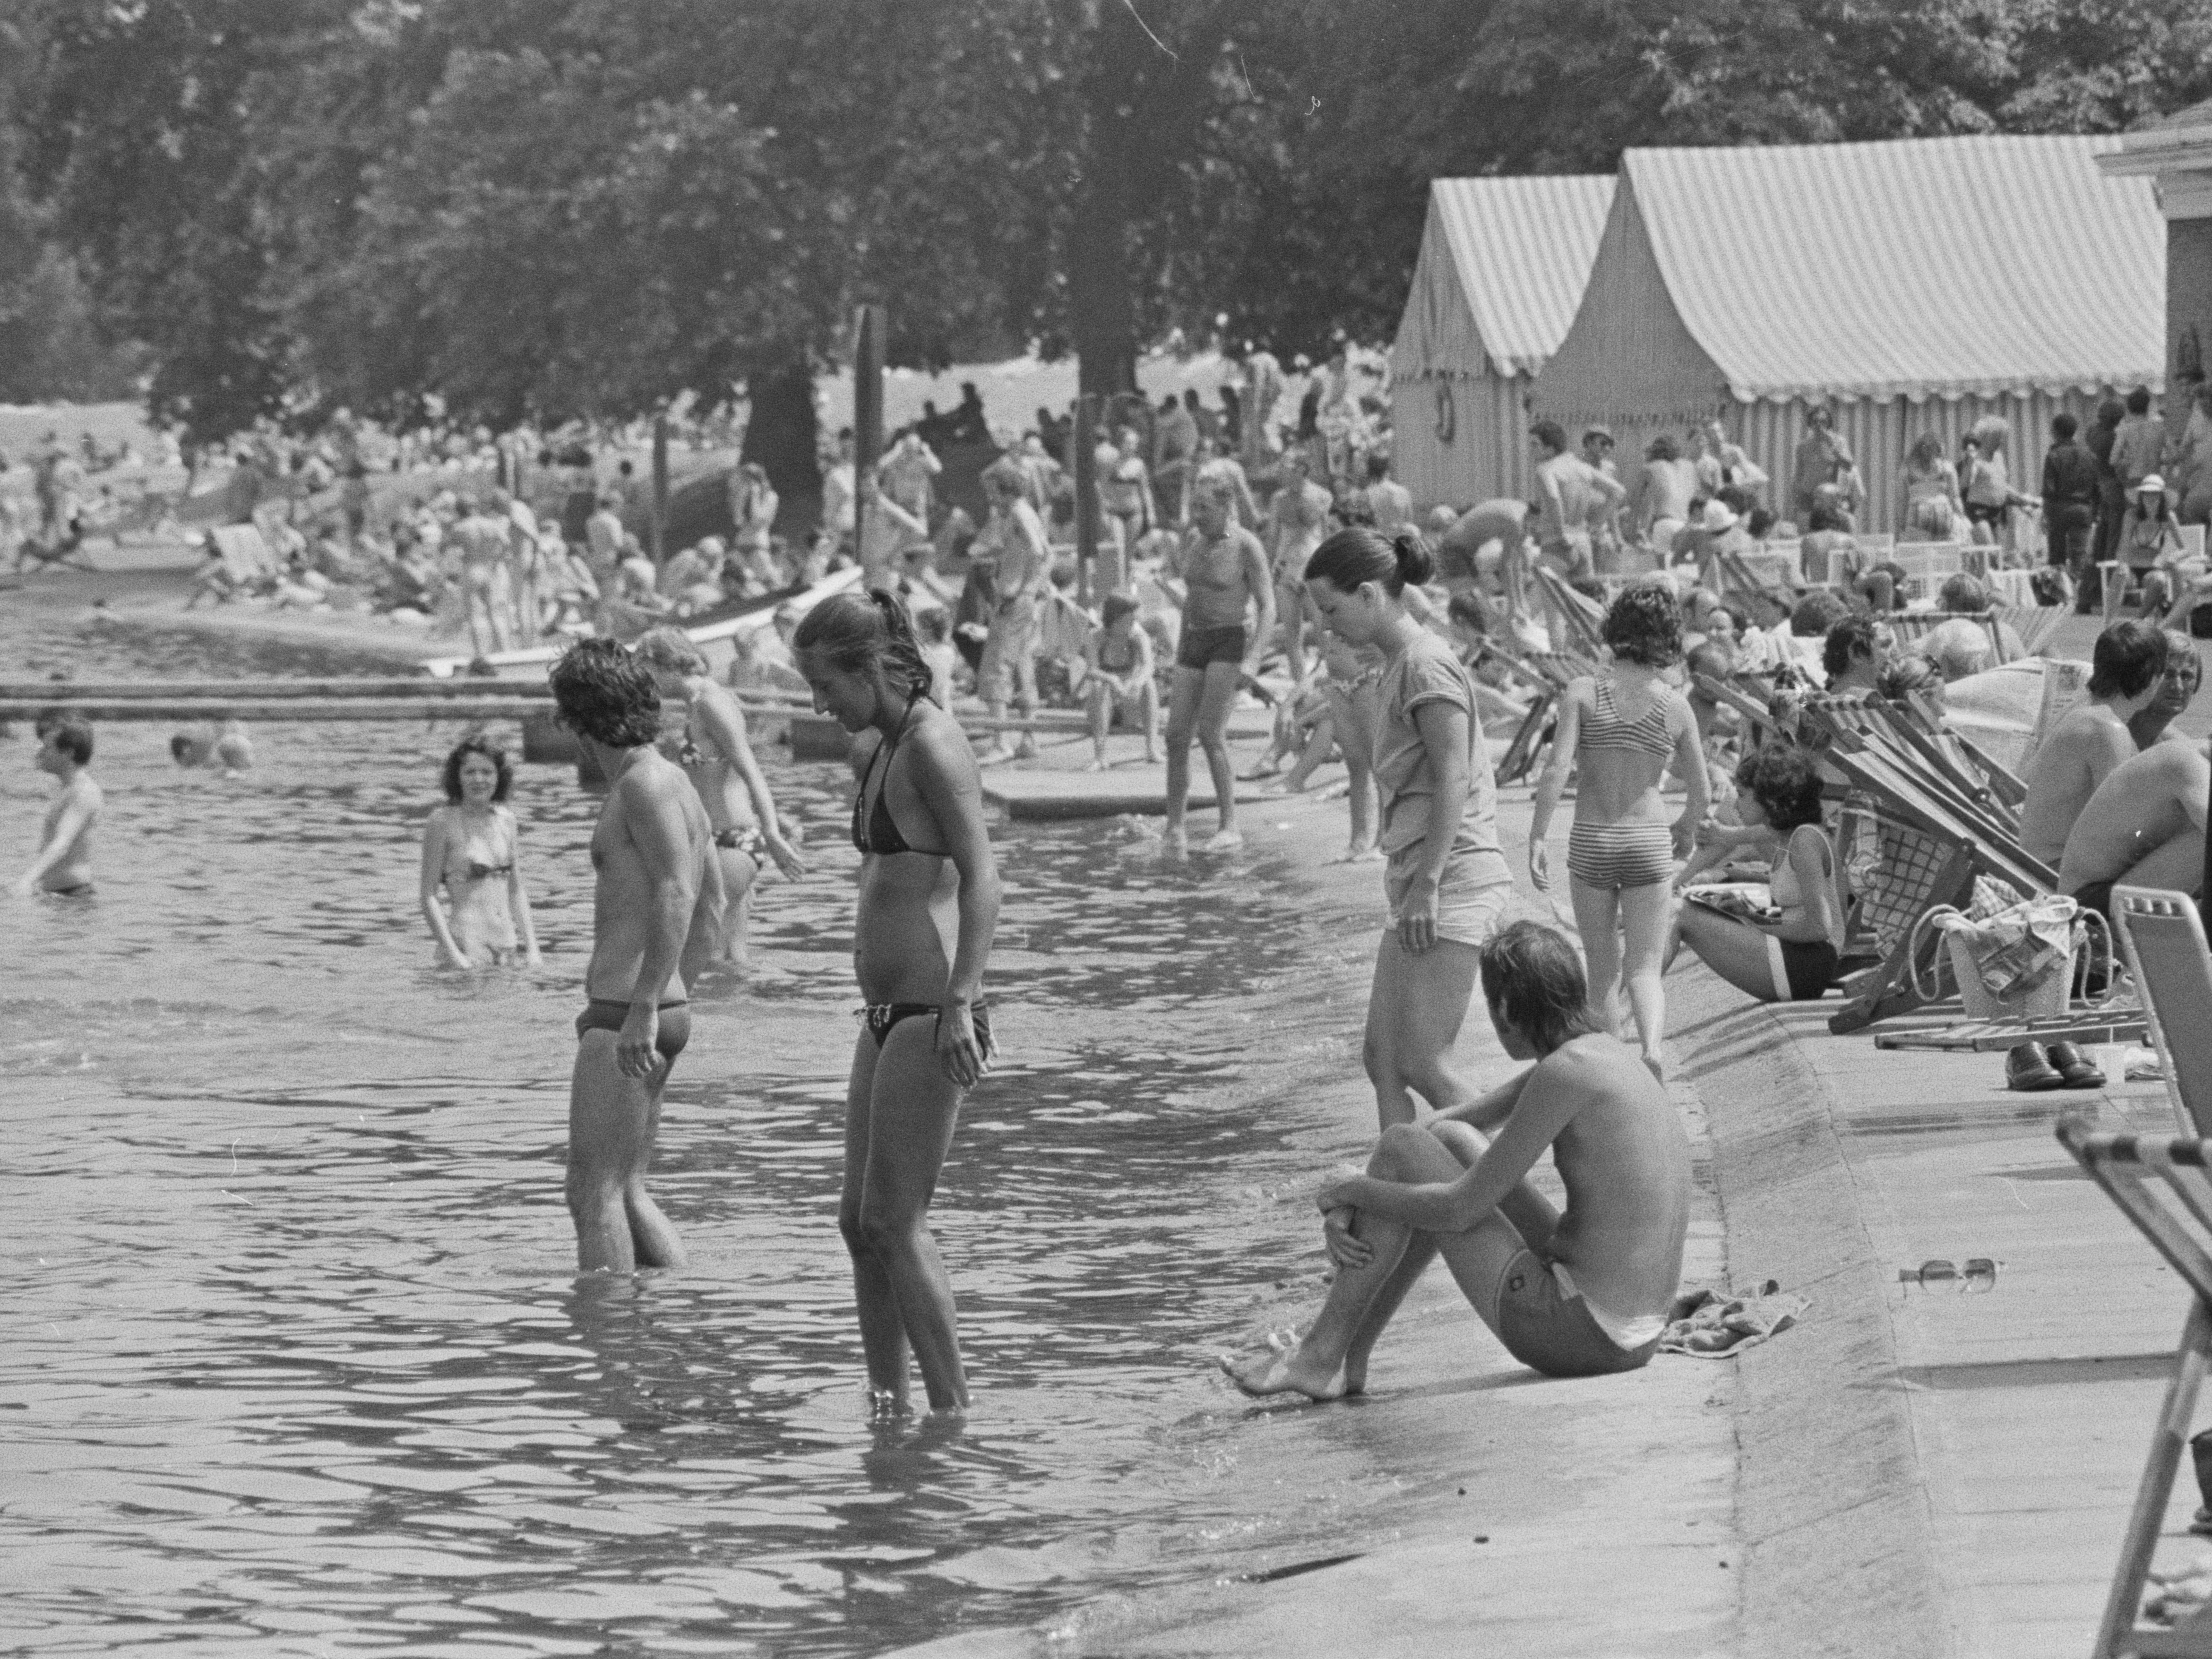 Londoners relaxing on the Serpentine in Hyde Park on 25 June 1976